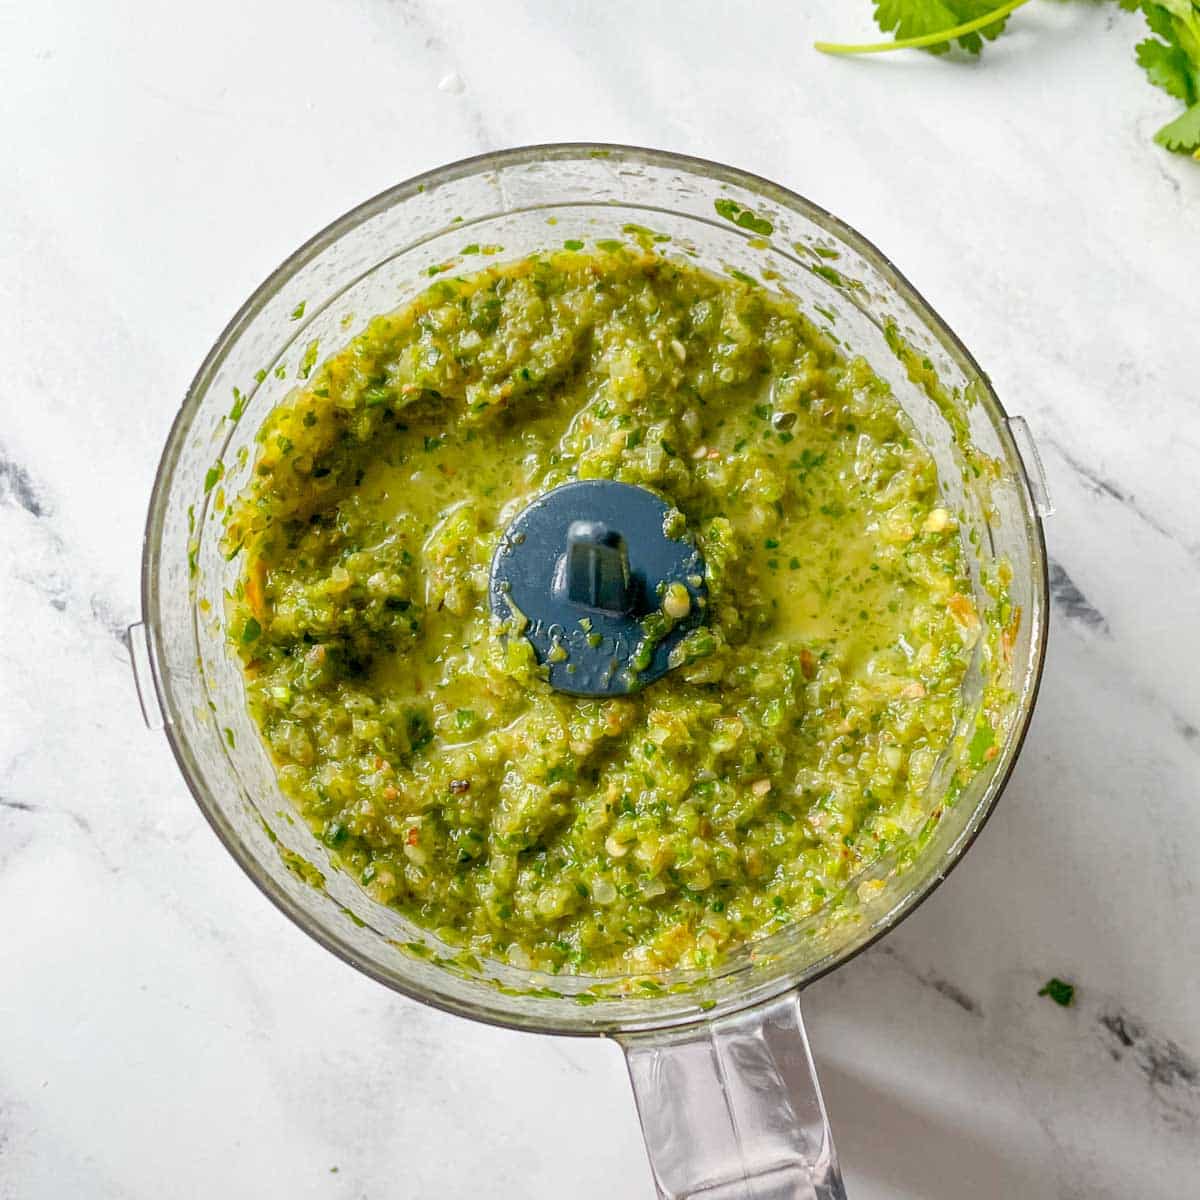 The finished serrano salsa is shown in the base of a food processor.